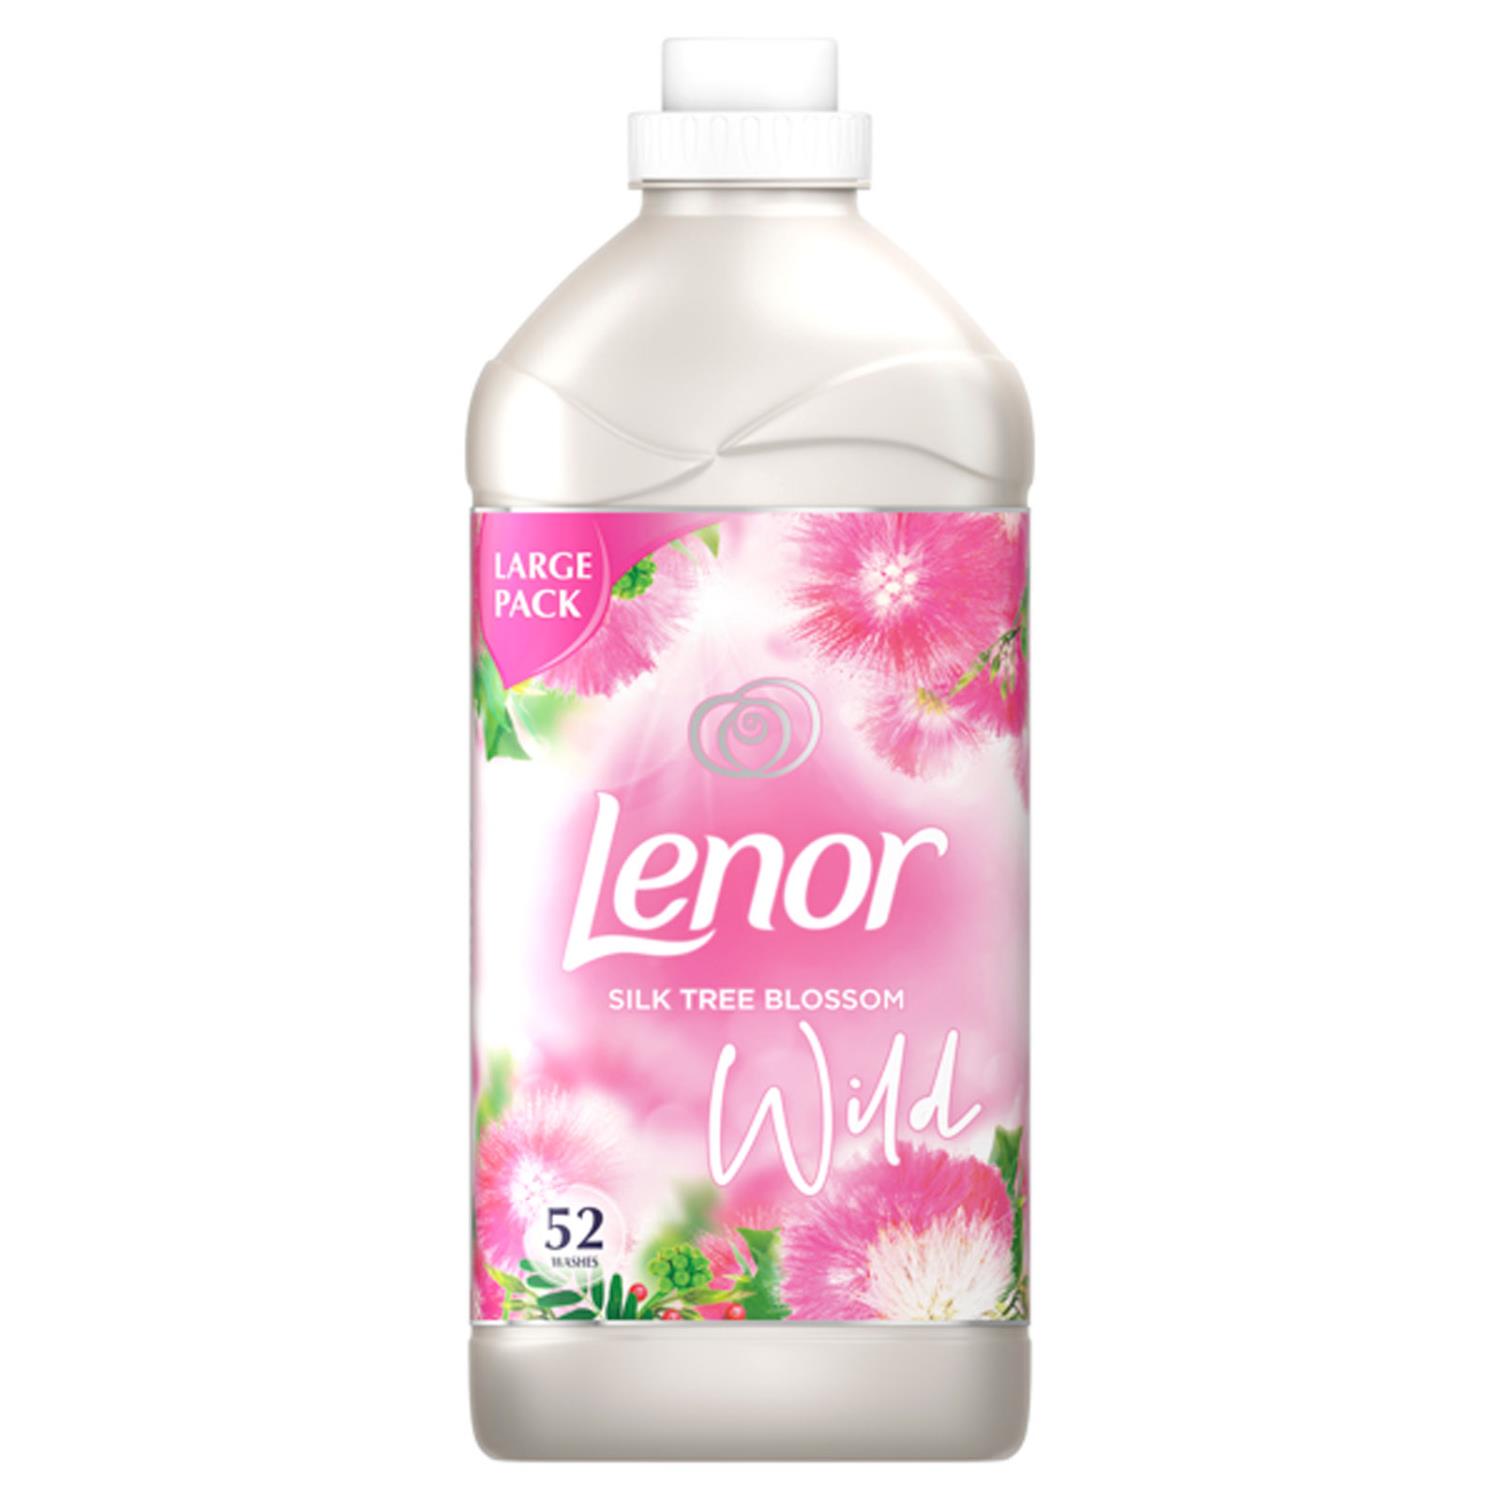 Lenor Silk Tree Blossom Fabric Conditioner Large Pack 1,82L